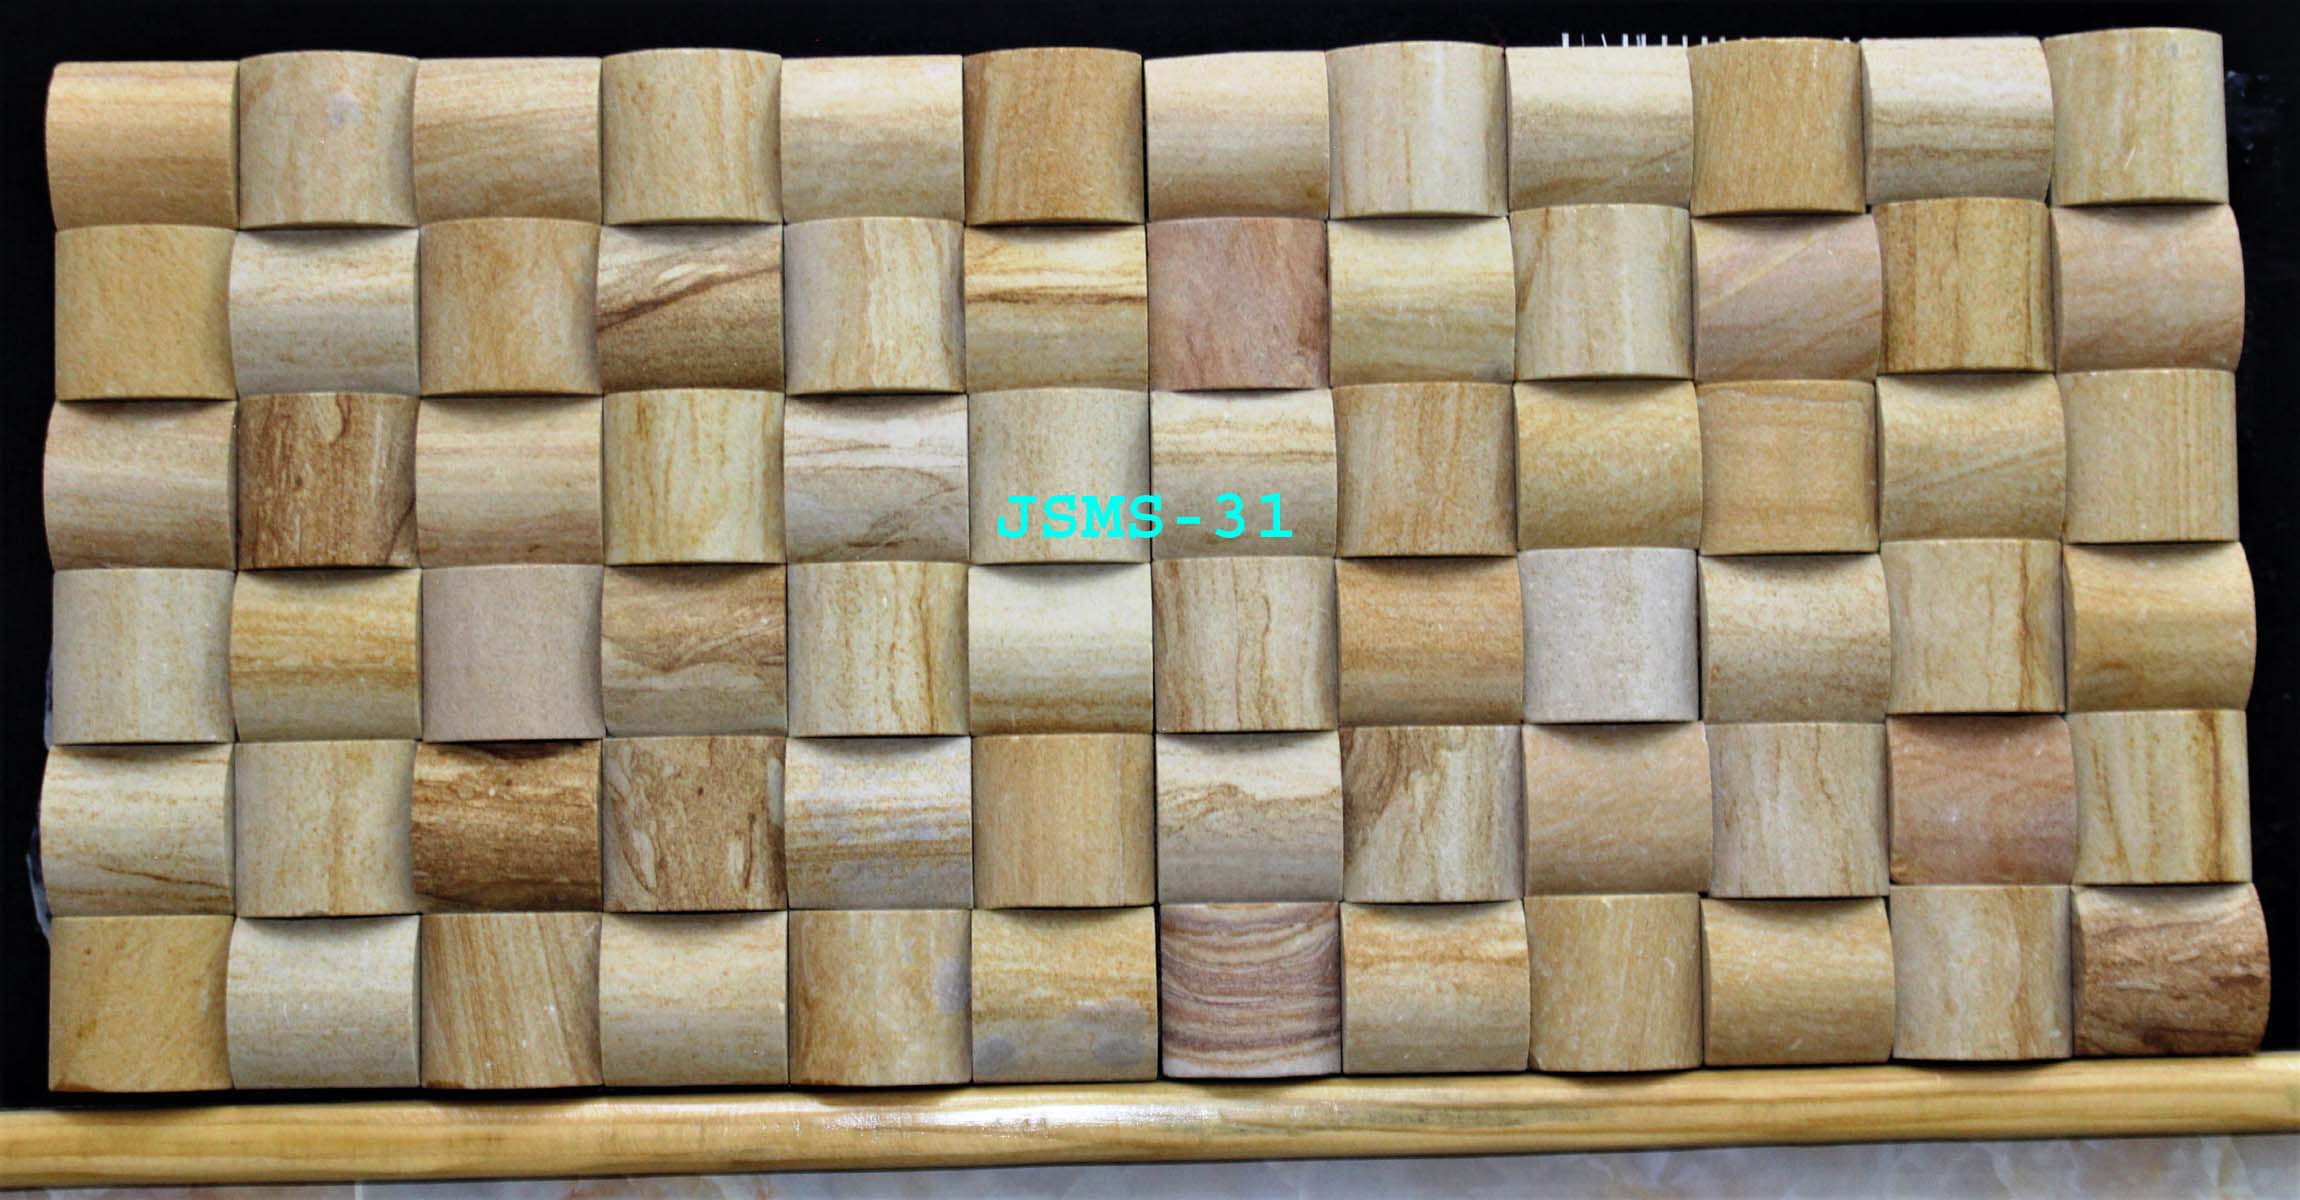 New Design Of Stone Mosaic Tiles For Interior and Exterior House Wall